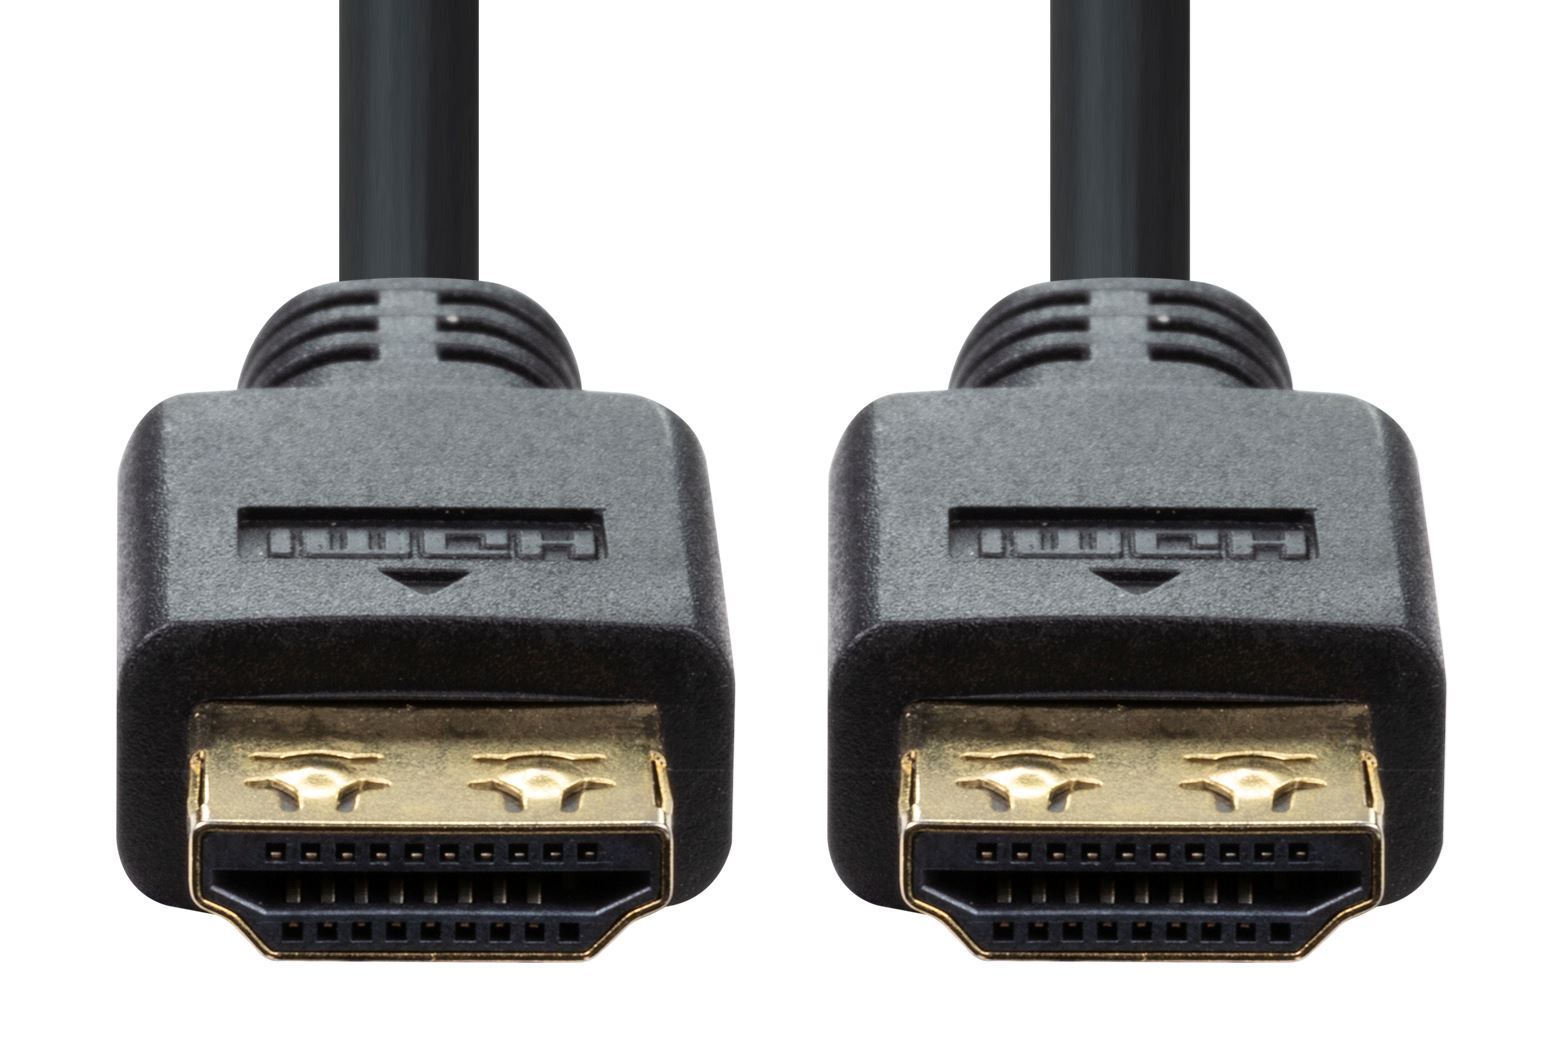 DYNAMIX_4m_HDMI_High_Speed_18Gbps_Flexi_Lock_Cable_with_Ethernet._Max_Res:_4K2K@30/60Hz._32_Audio_channels._10/12bit_colour_depth._Supports_CEC_2.0,_3D,_ARC,_Ethernet_2x_simultaneous_video_streams. 740